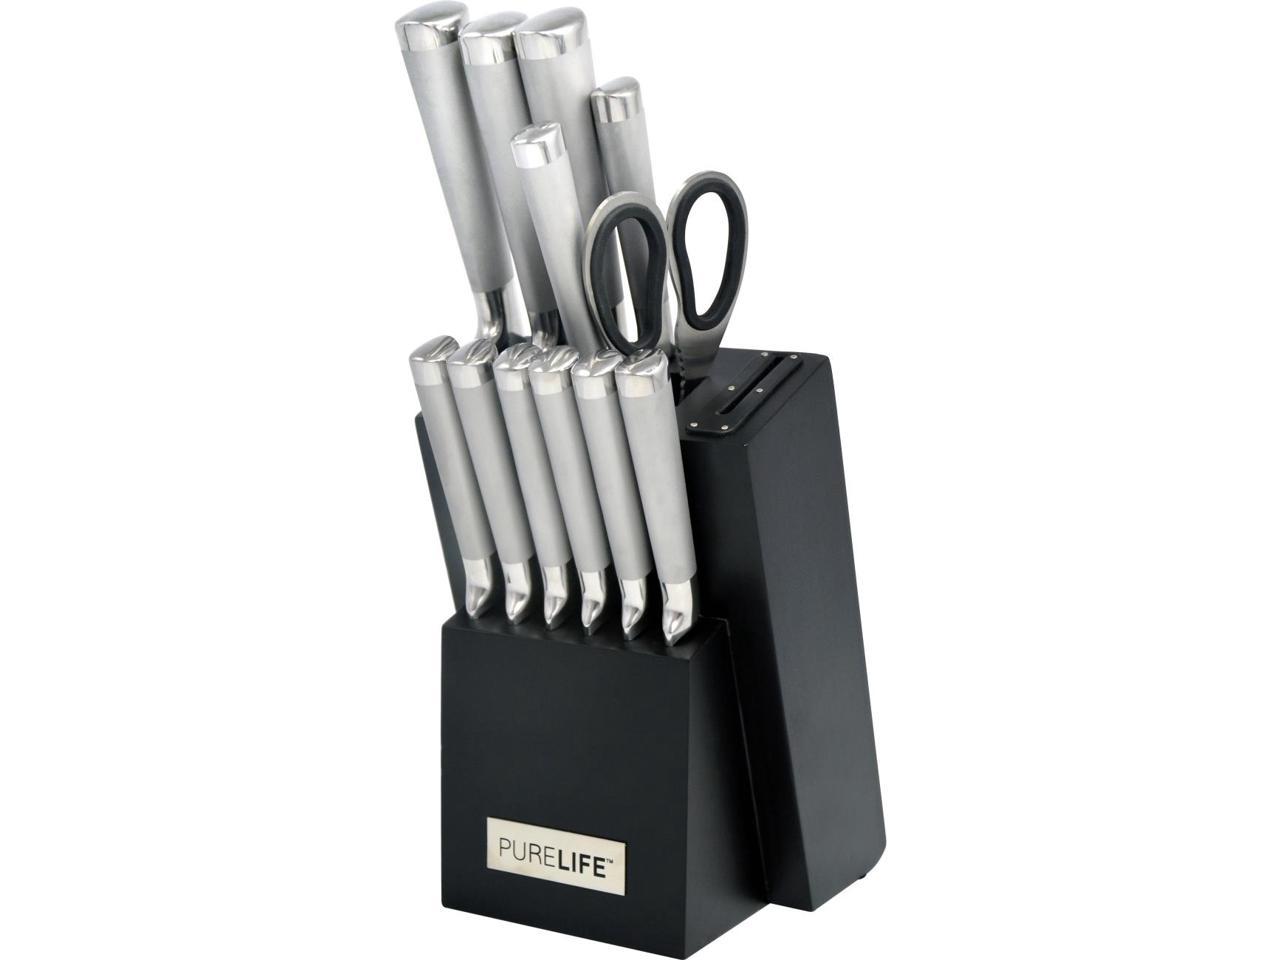 Ragalta Purelife 13-piece forged stainless steel knife block set for $13